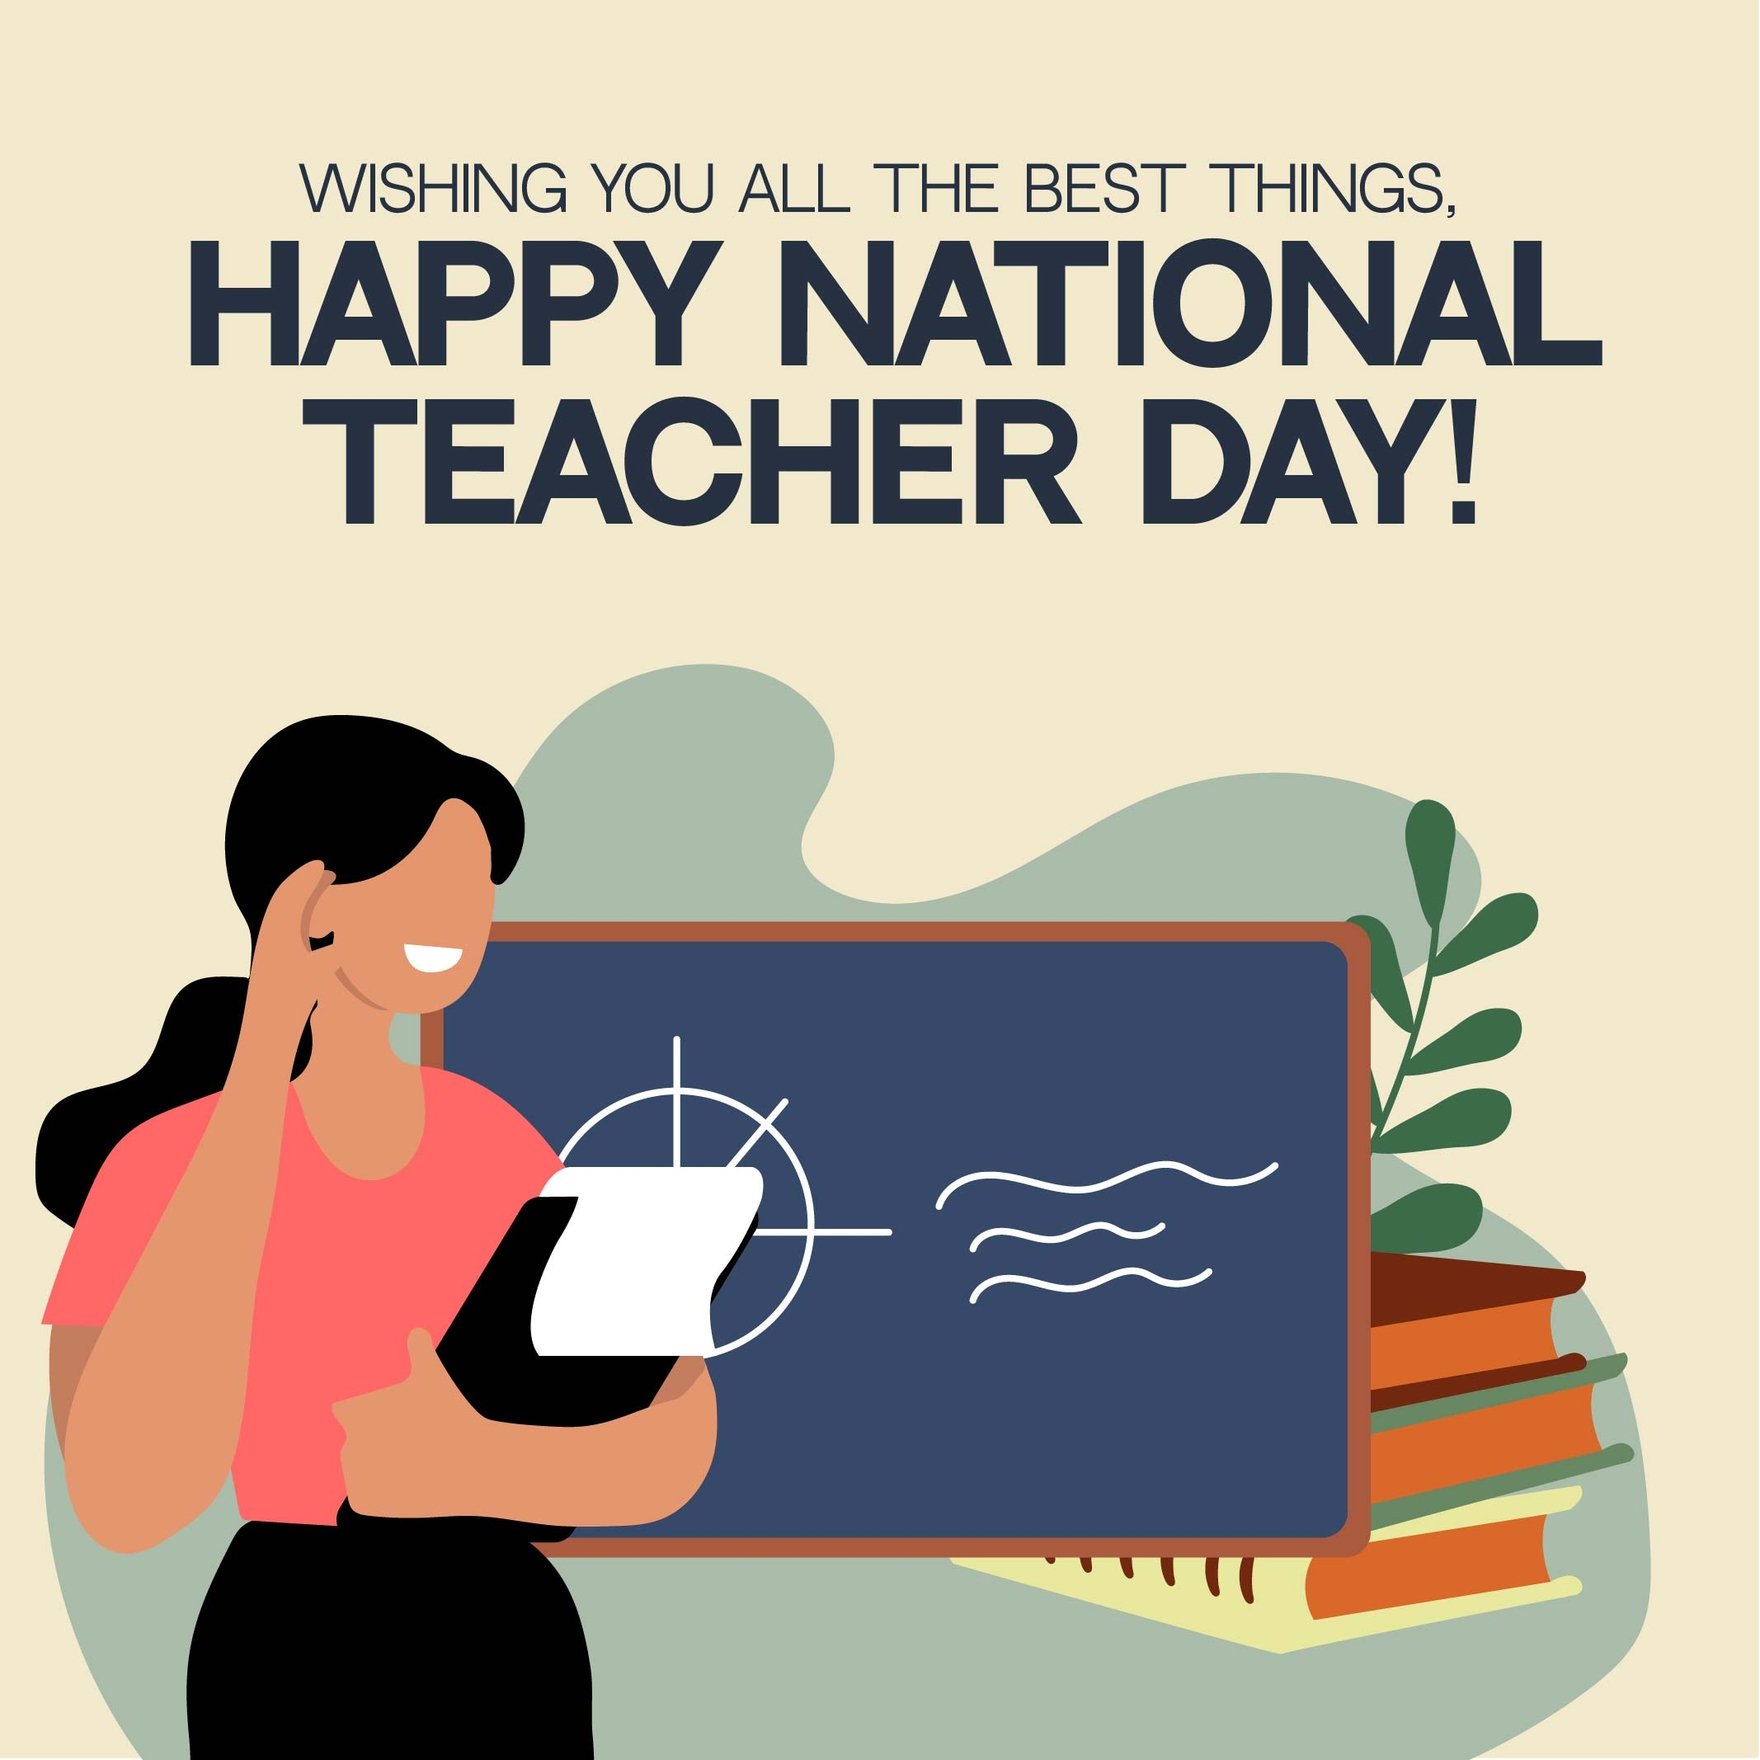 Free National Teacher Day Wishes Vector in Illustrator, PSD, EPS, SVG, JPG, PNG